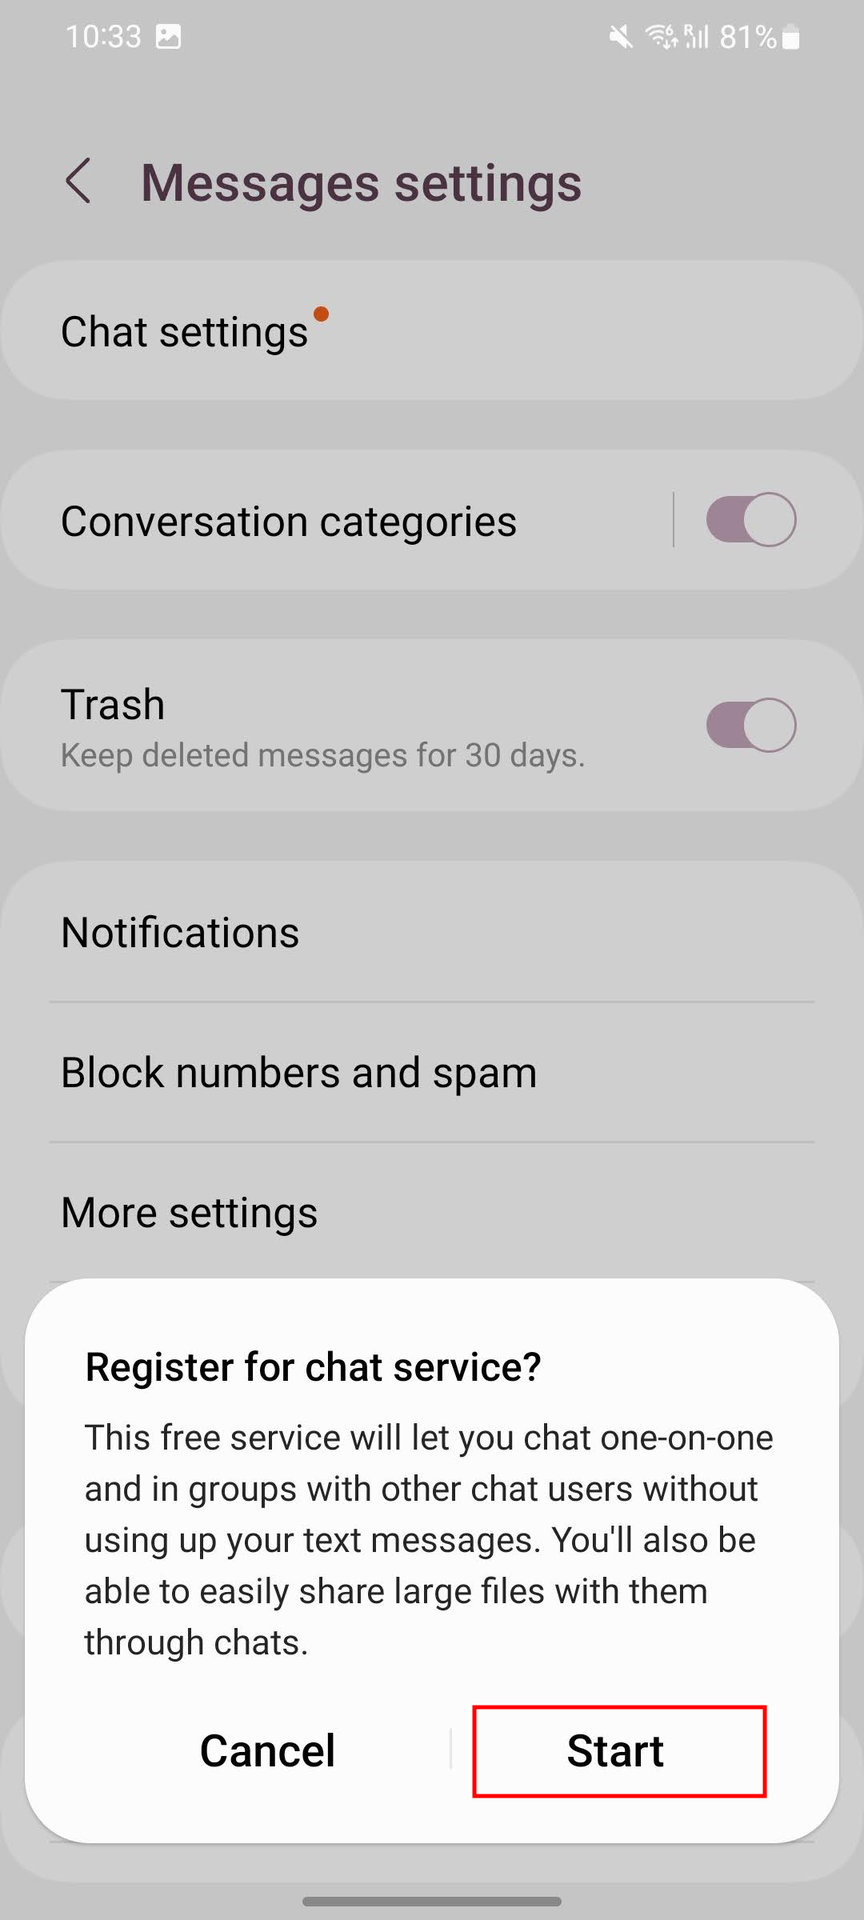 How to enable or disable RCS messaging on a Samsung phone (4)